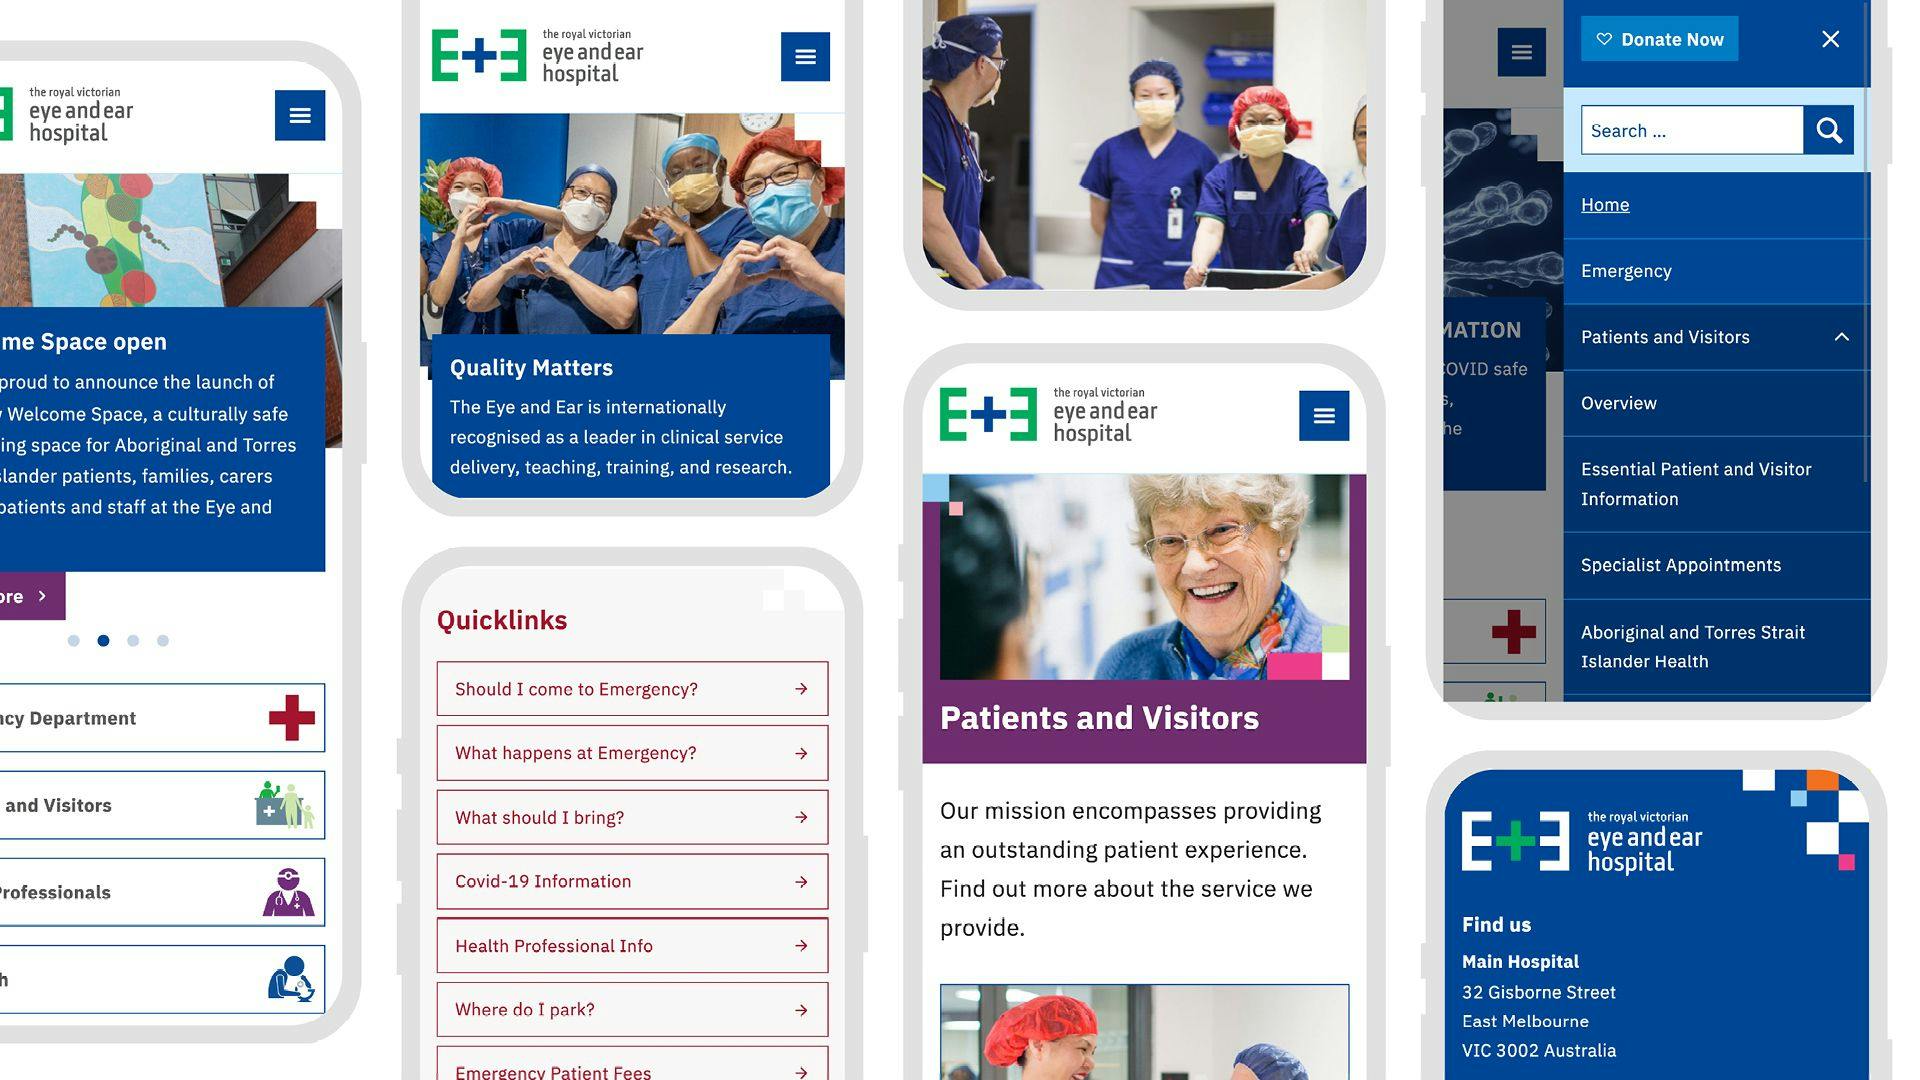 A selection of mobile views from the website showing various pages